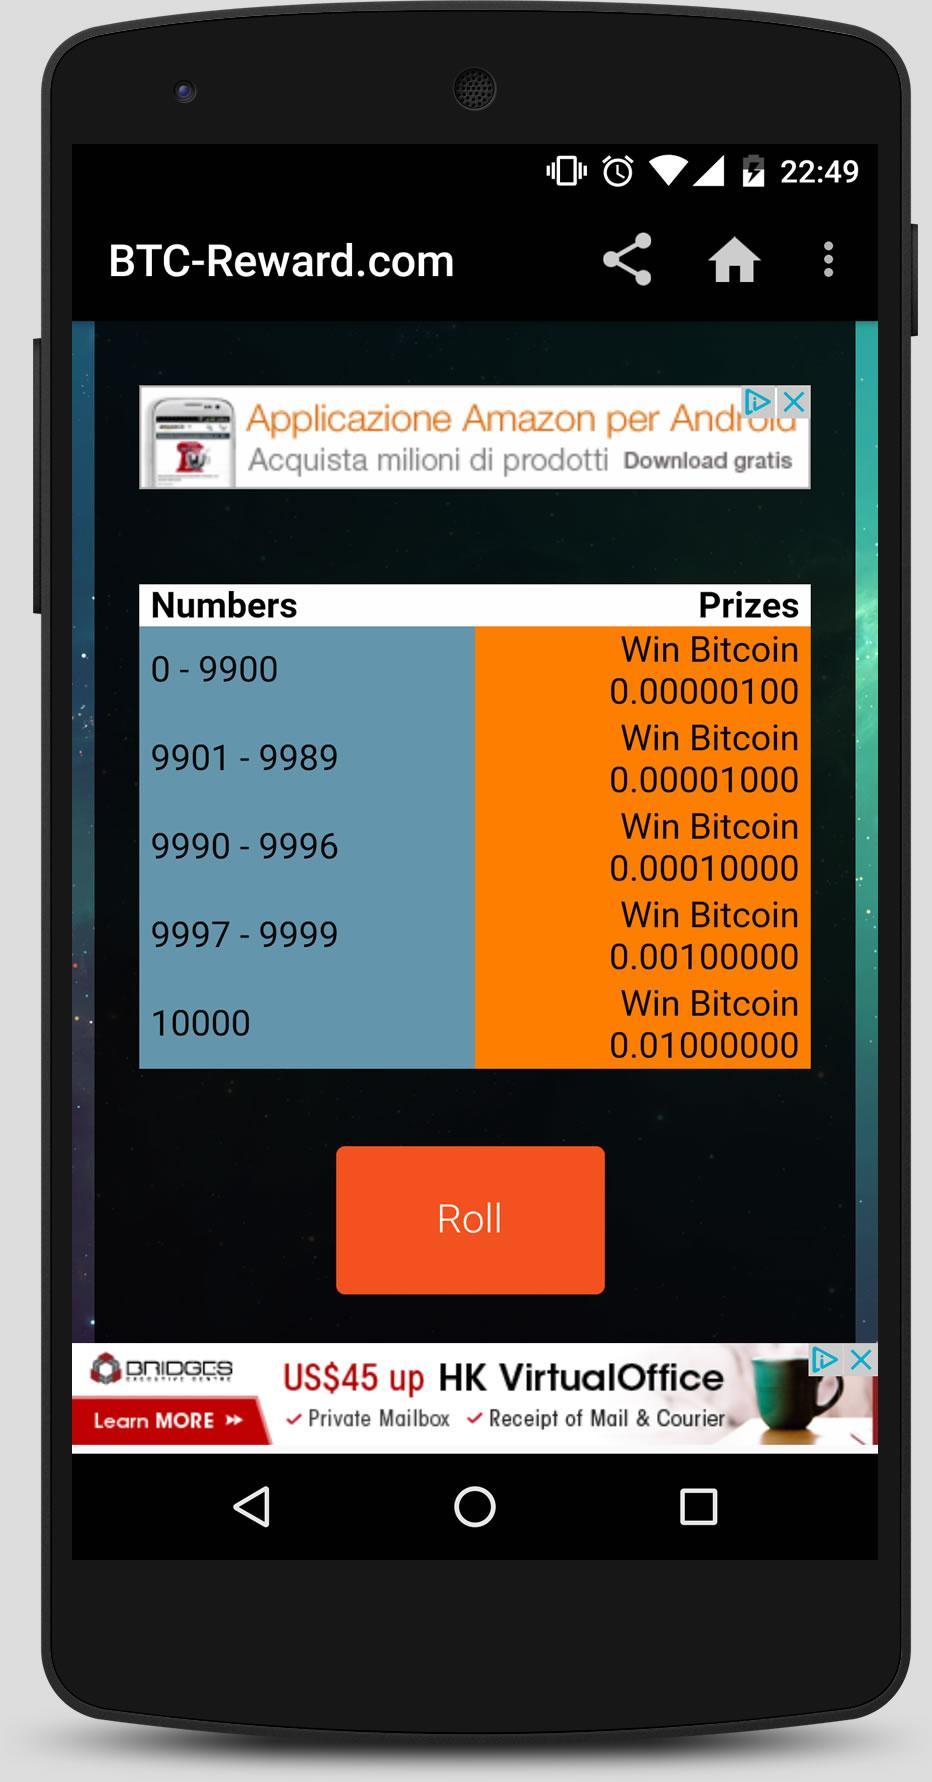 Btc Reward Earn Free Bitcoin For Android Apk Download - 